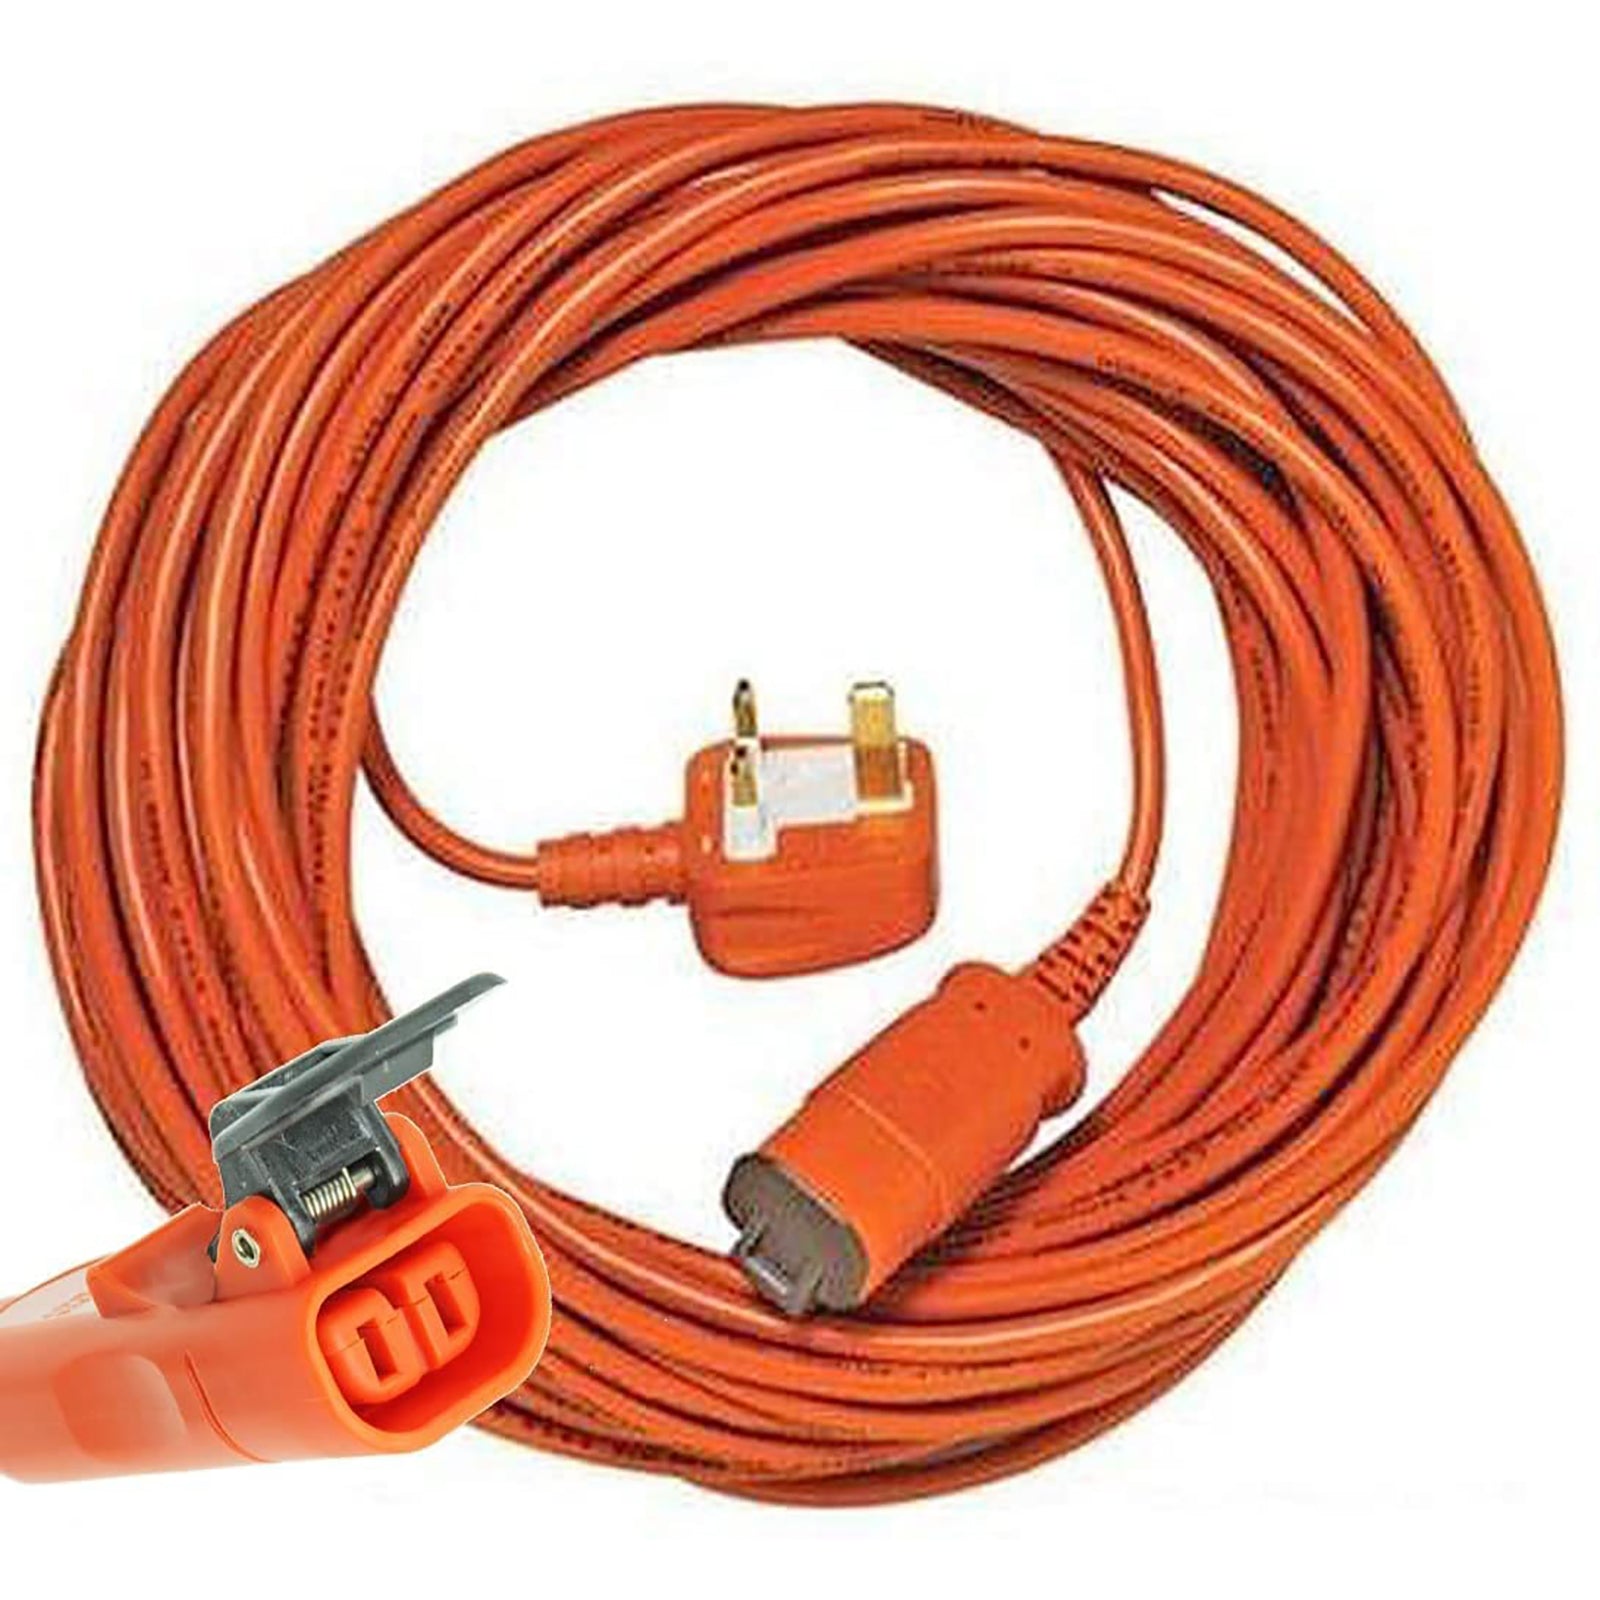 Cable for Flymo Lawnmower Hedge Trimmer Metre Lead Plug (15m)